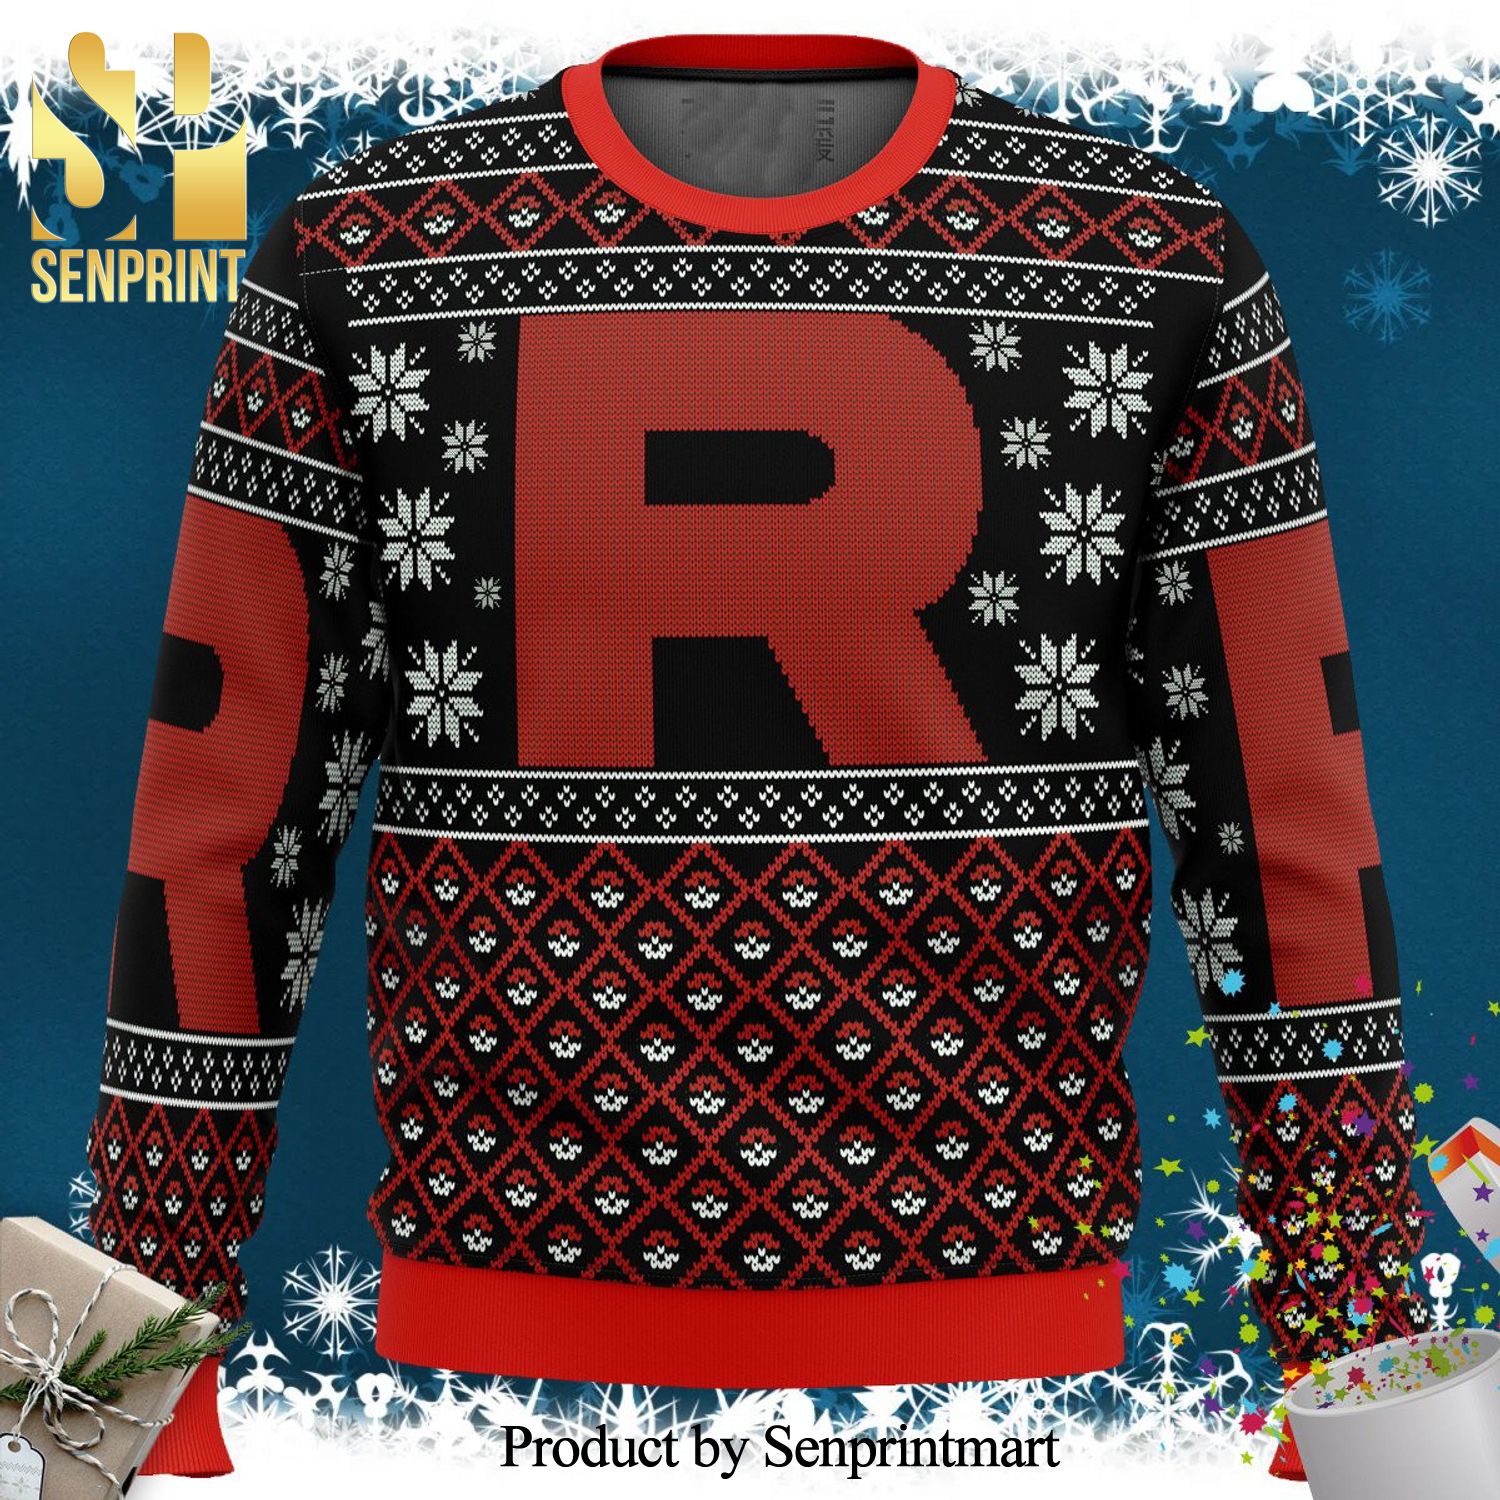 Pokemon Team Rocket Red Black Knitted Ugly Christmas Sweater